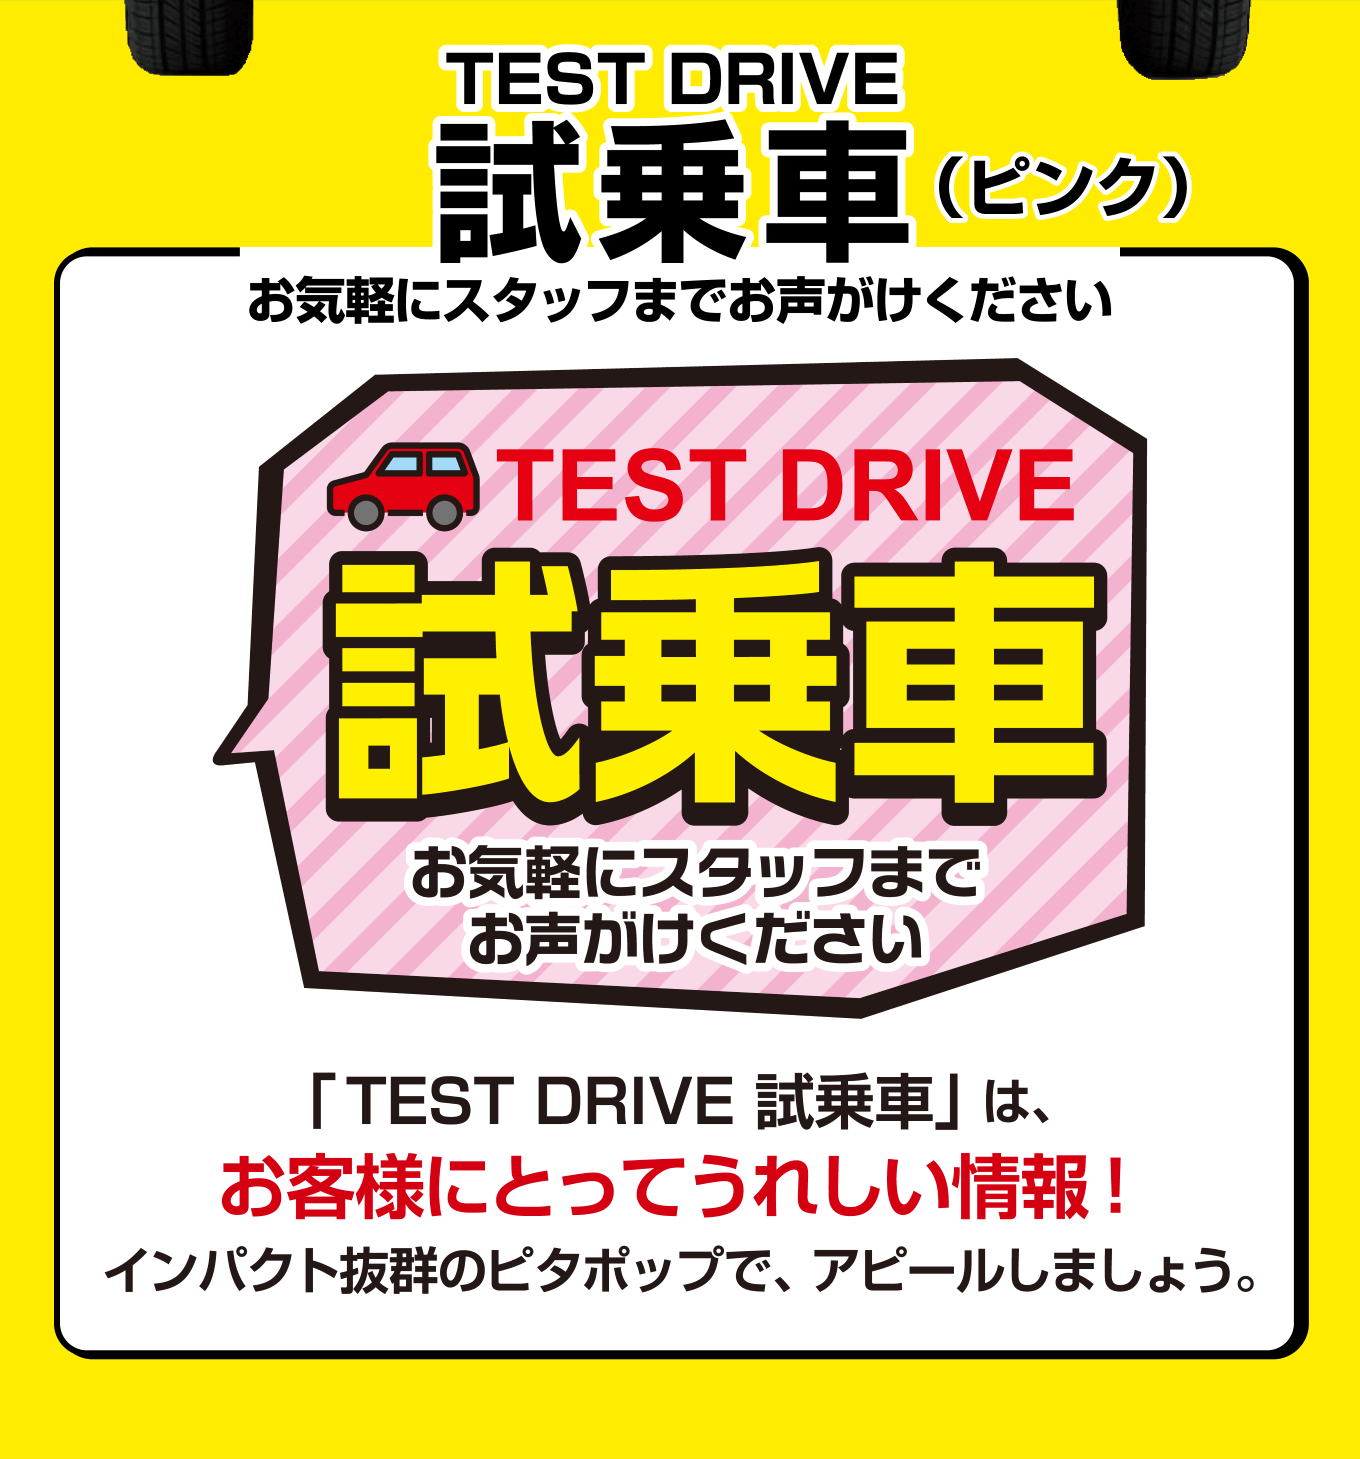 TEST DRIVE 試乗車（ピンク）